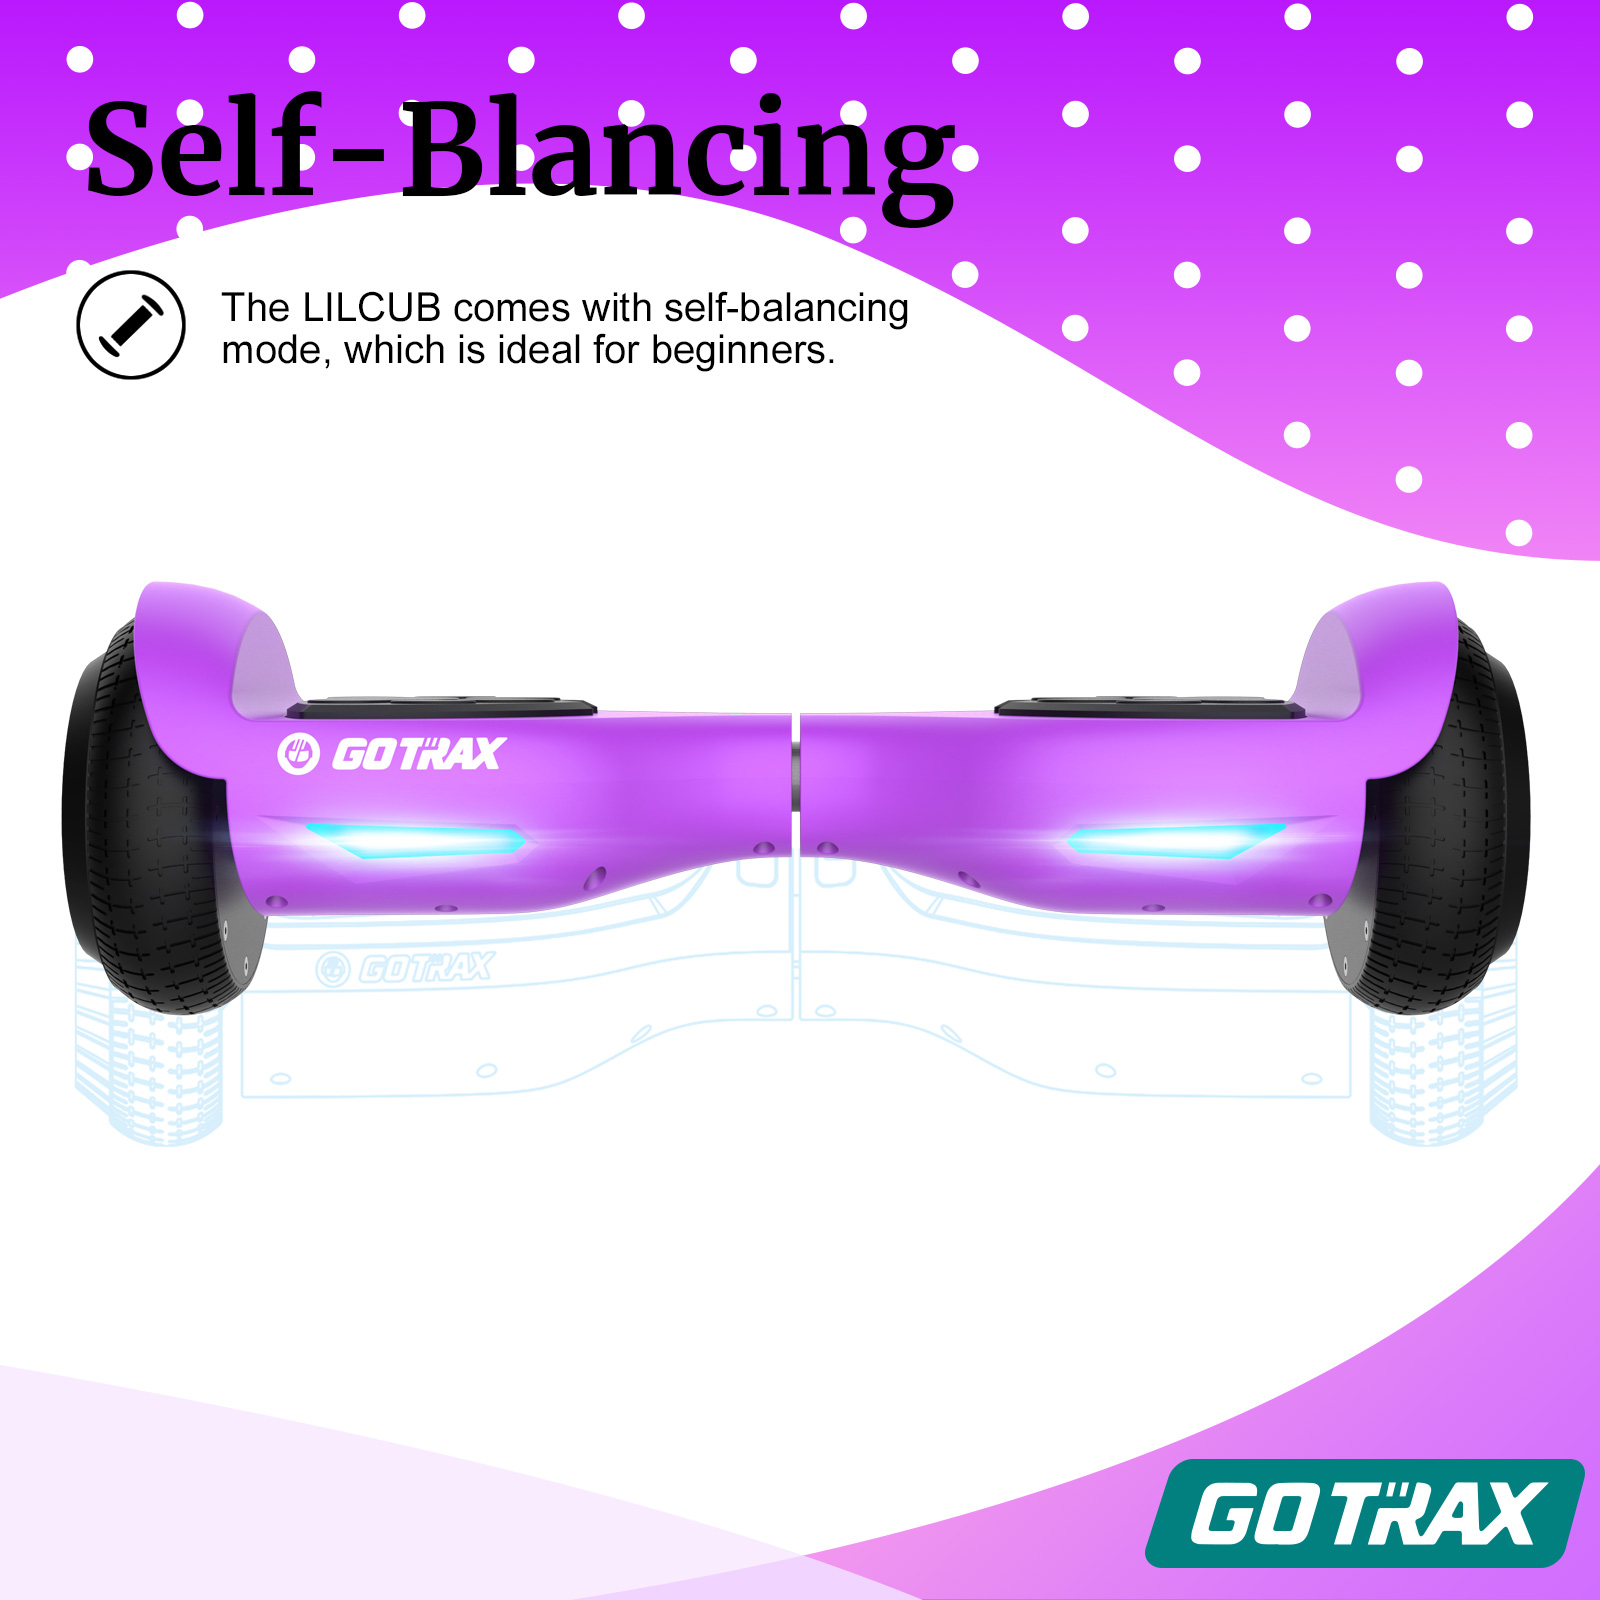 GOTRAX Lil Cub Hoverboard 6.5" Wheels, Max 2.5 Miles, 6.2mph Self Balance for 44-88lbs Kids, Purple - image 5 of 11